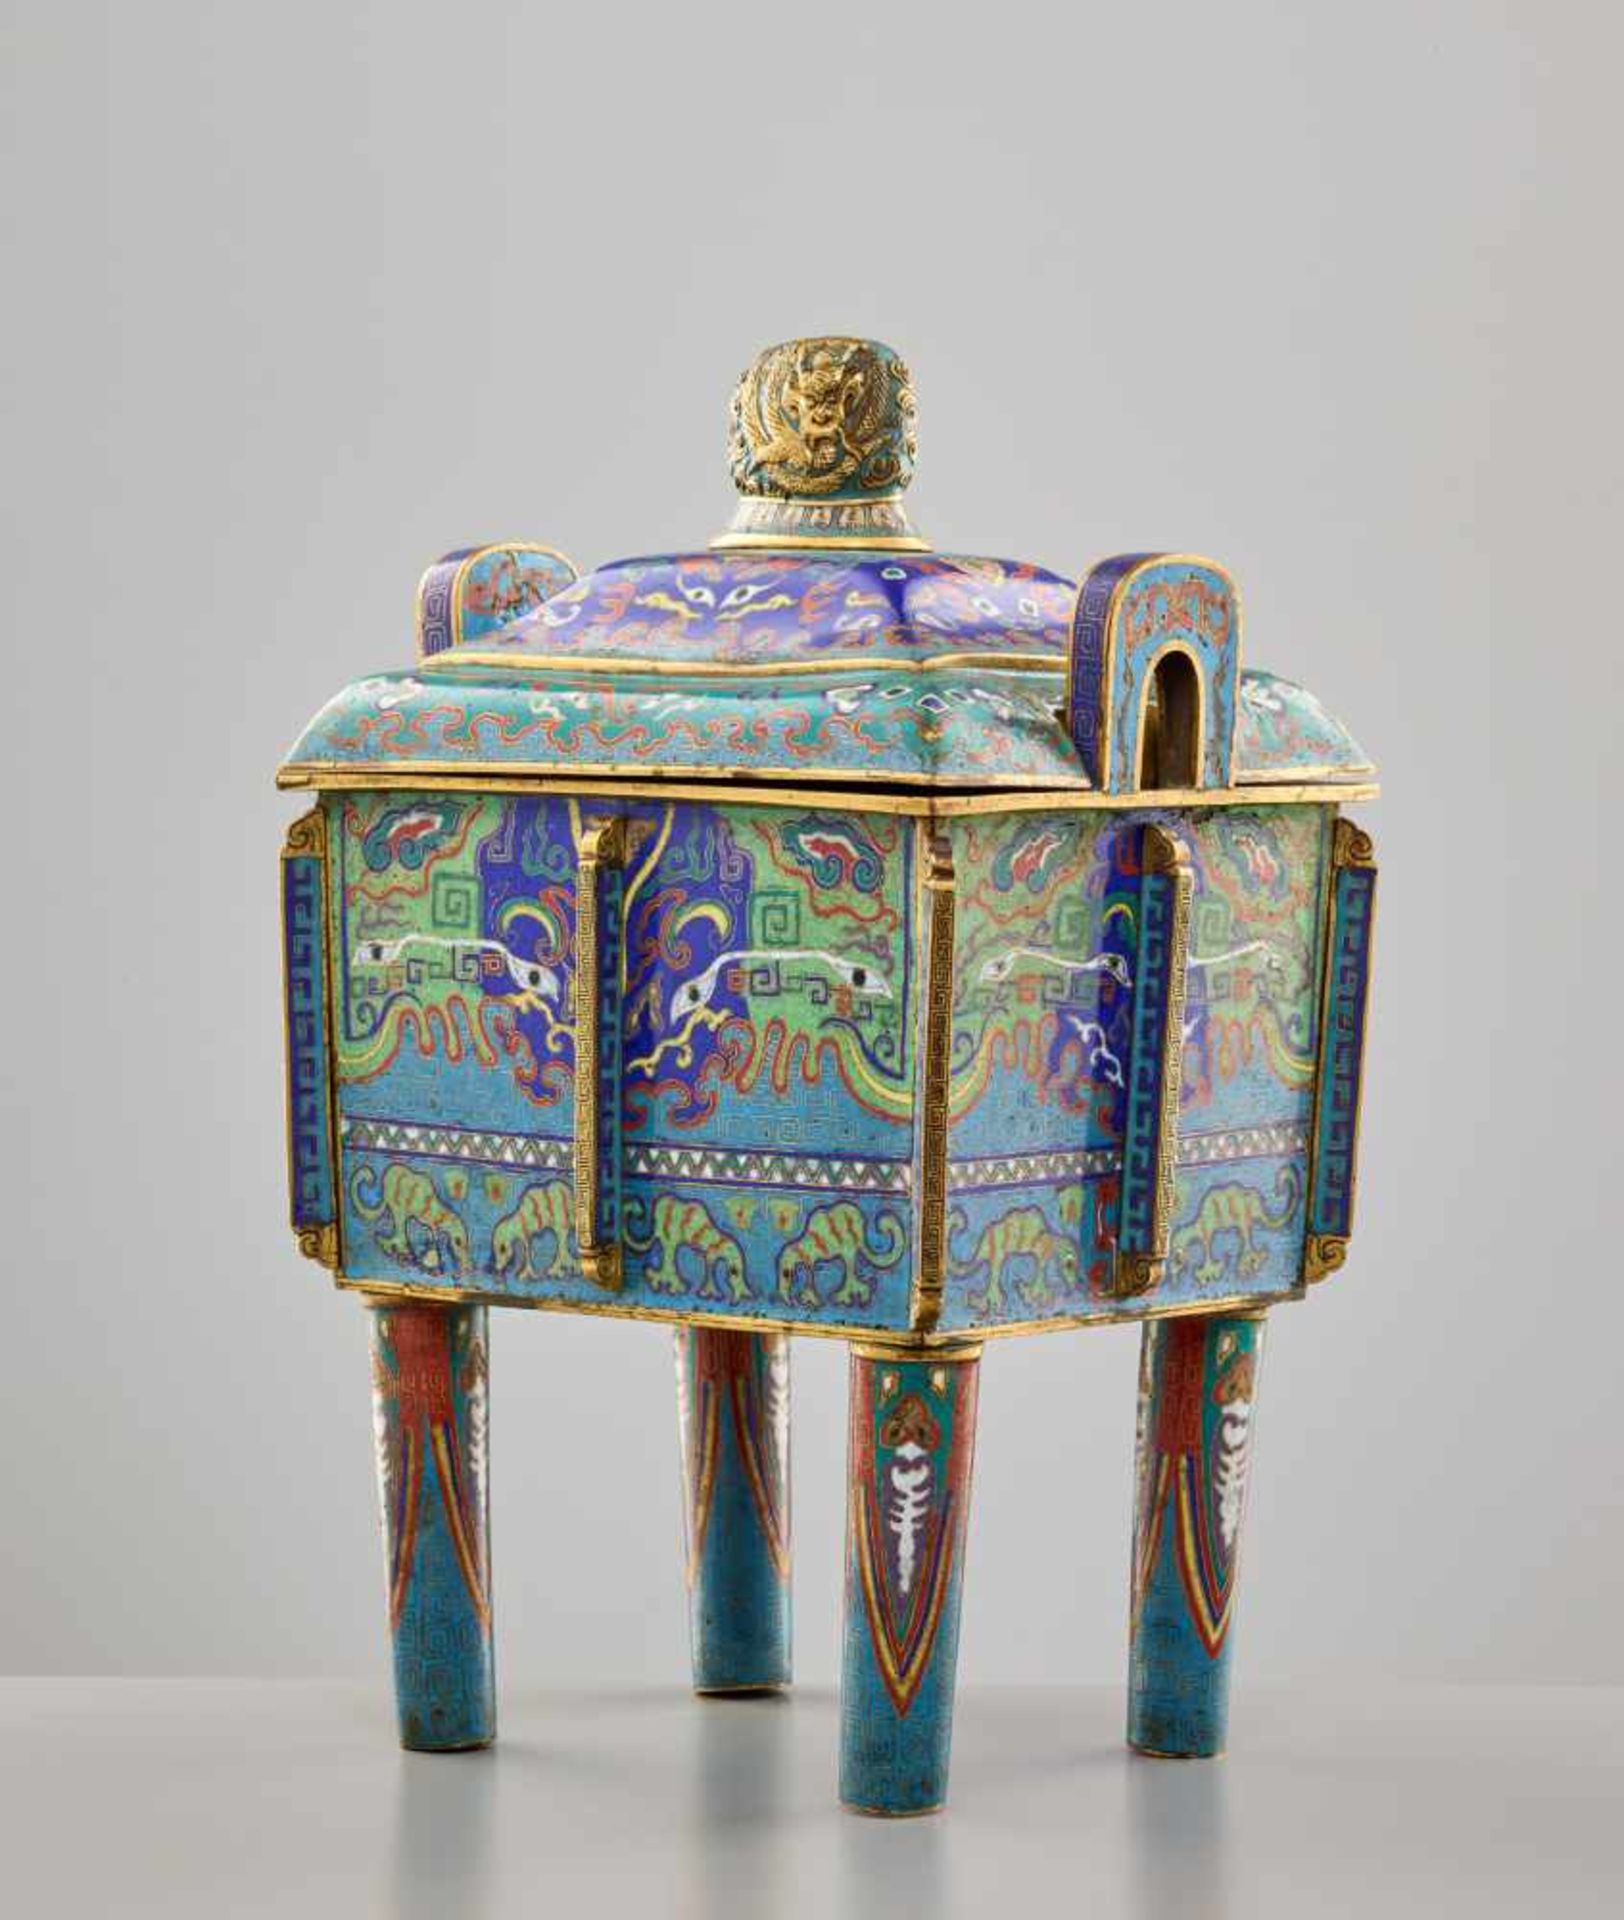 A CLOISONNÉ ENAMEL CENSER AND COVER, FANGDING, QING DYNASTYThe massively cast bronze vessel with